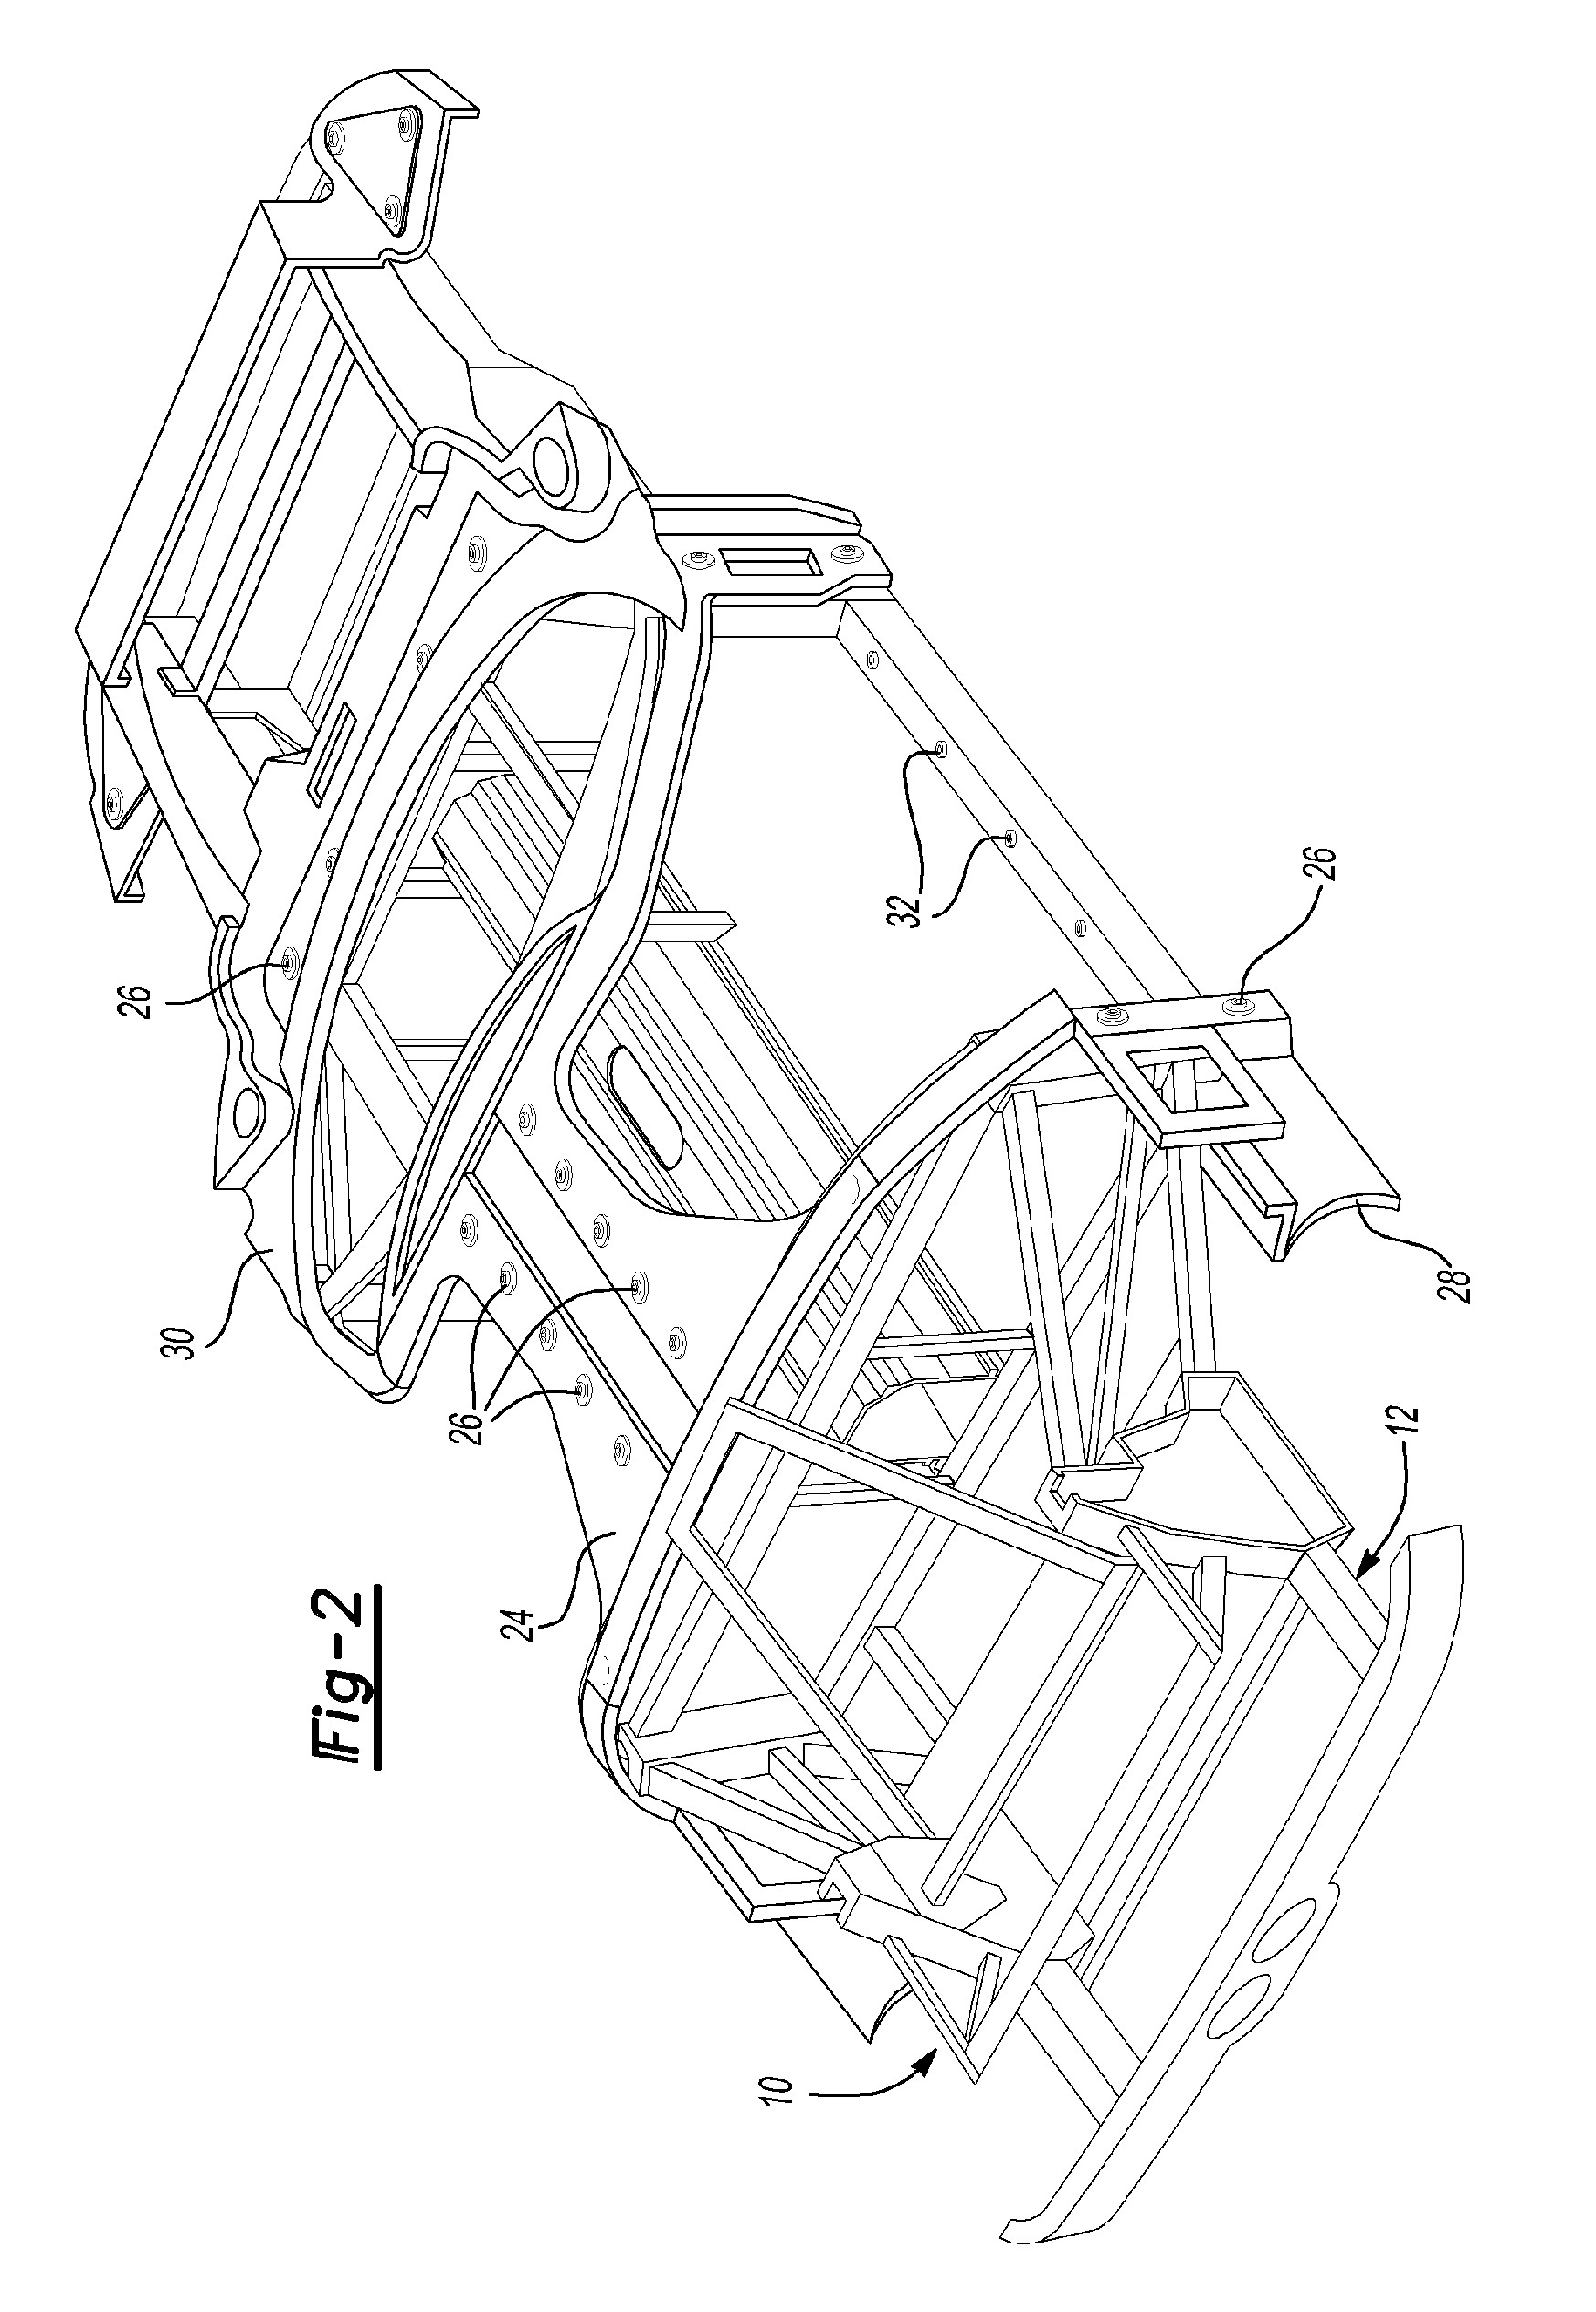 Rivet nut with machinable head and method of making a vehicle body